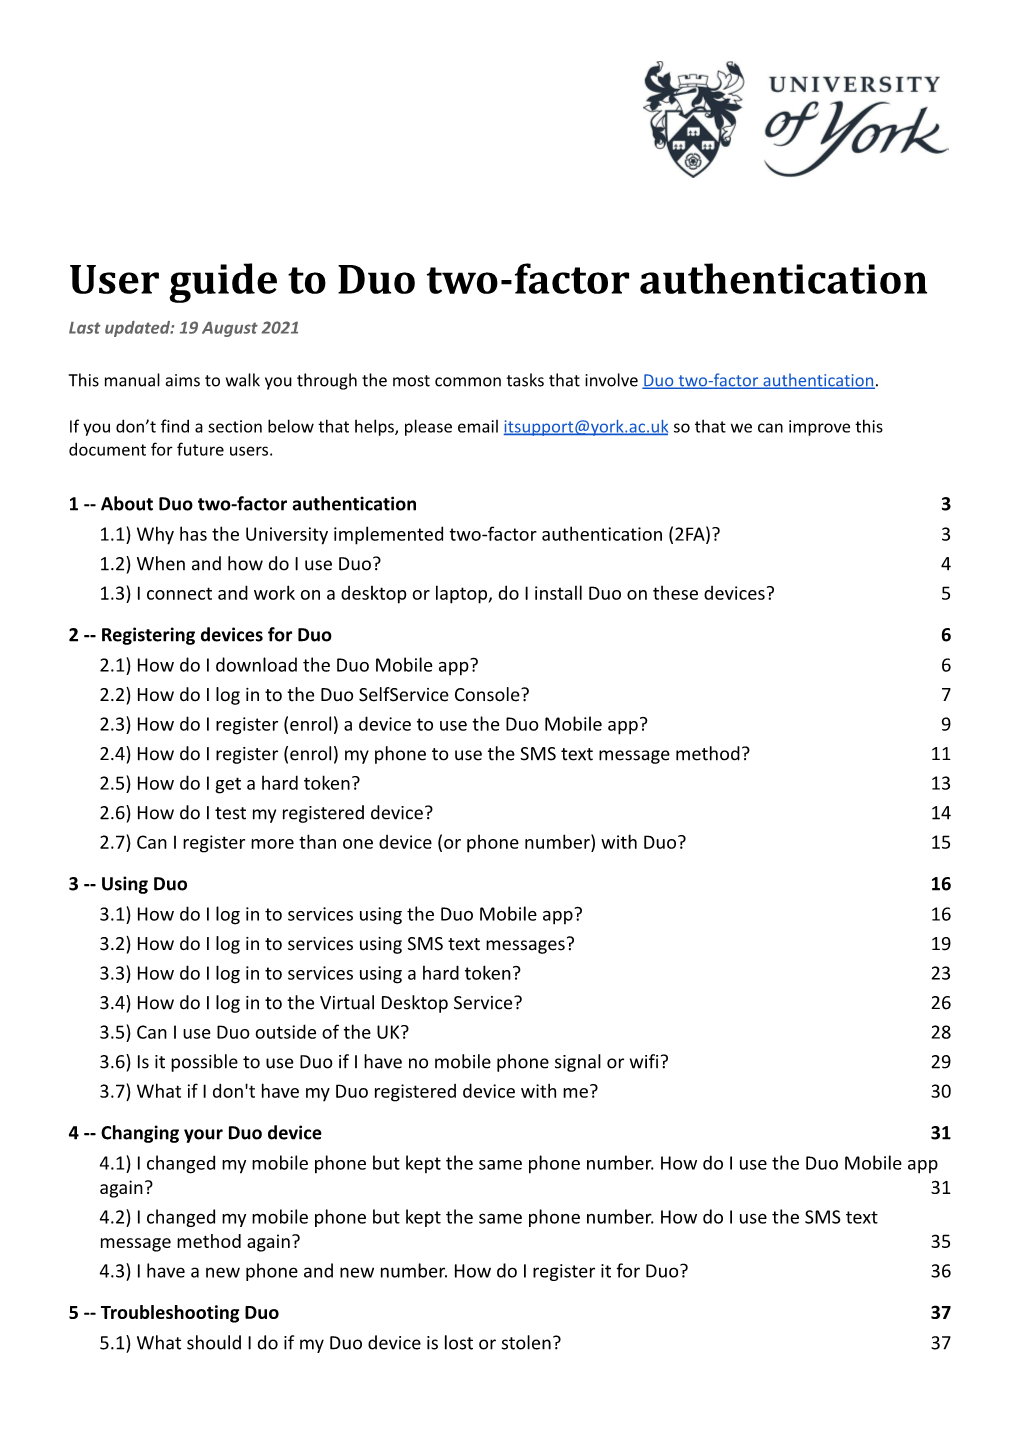 User Guide to Duo Two-Factor Authentication Last Updated: 19 August 2021